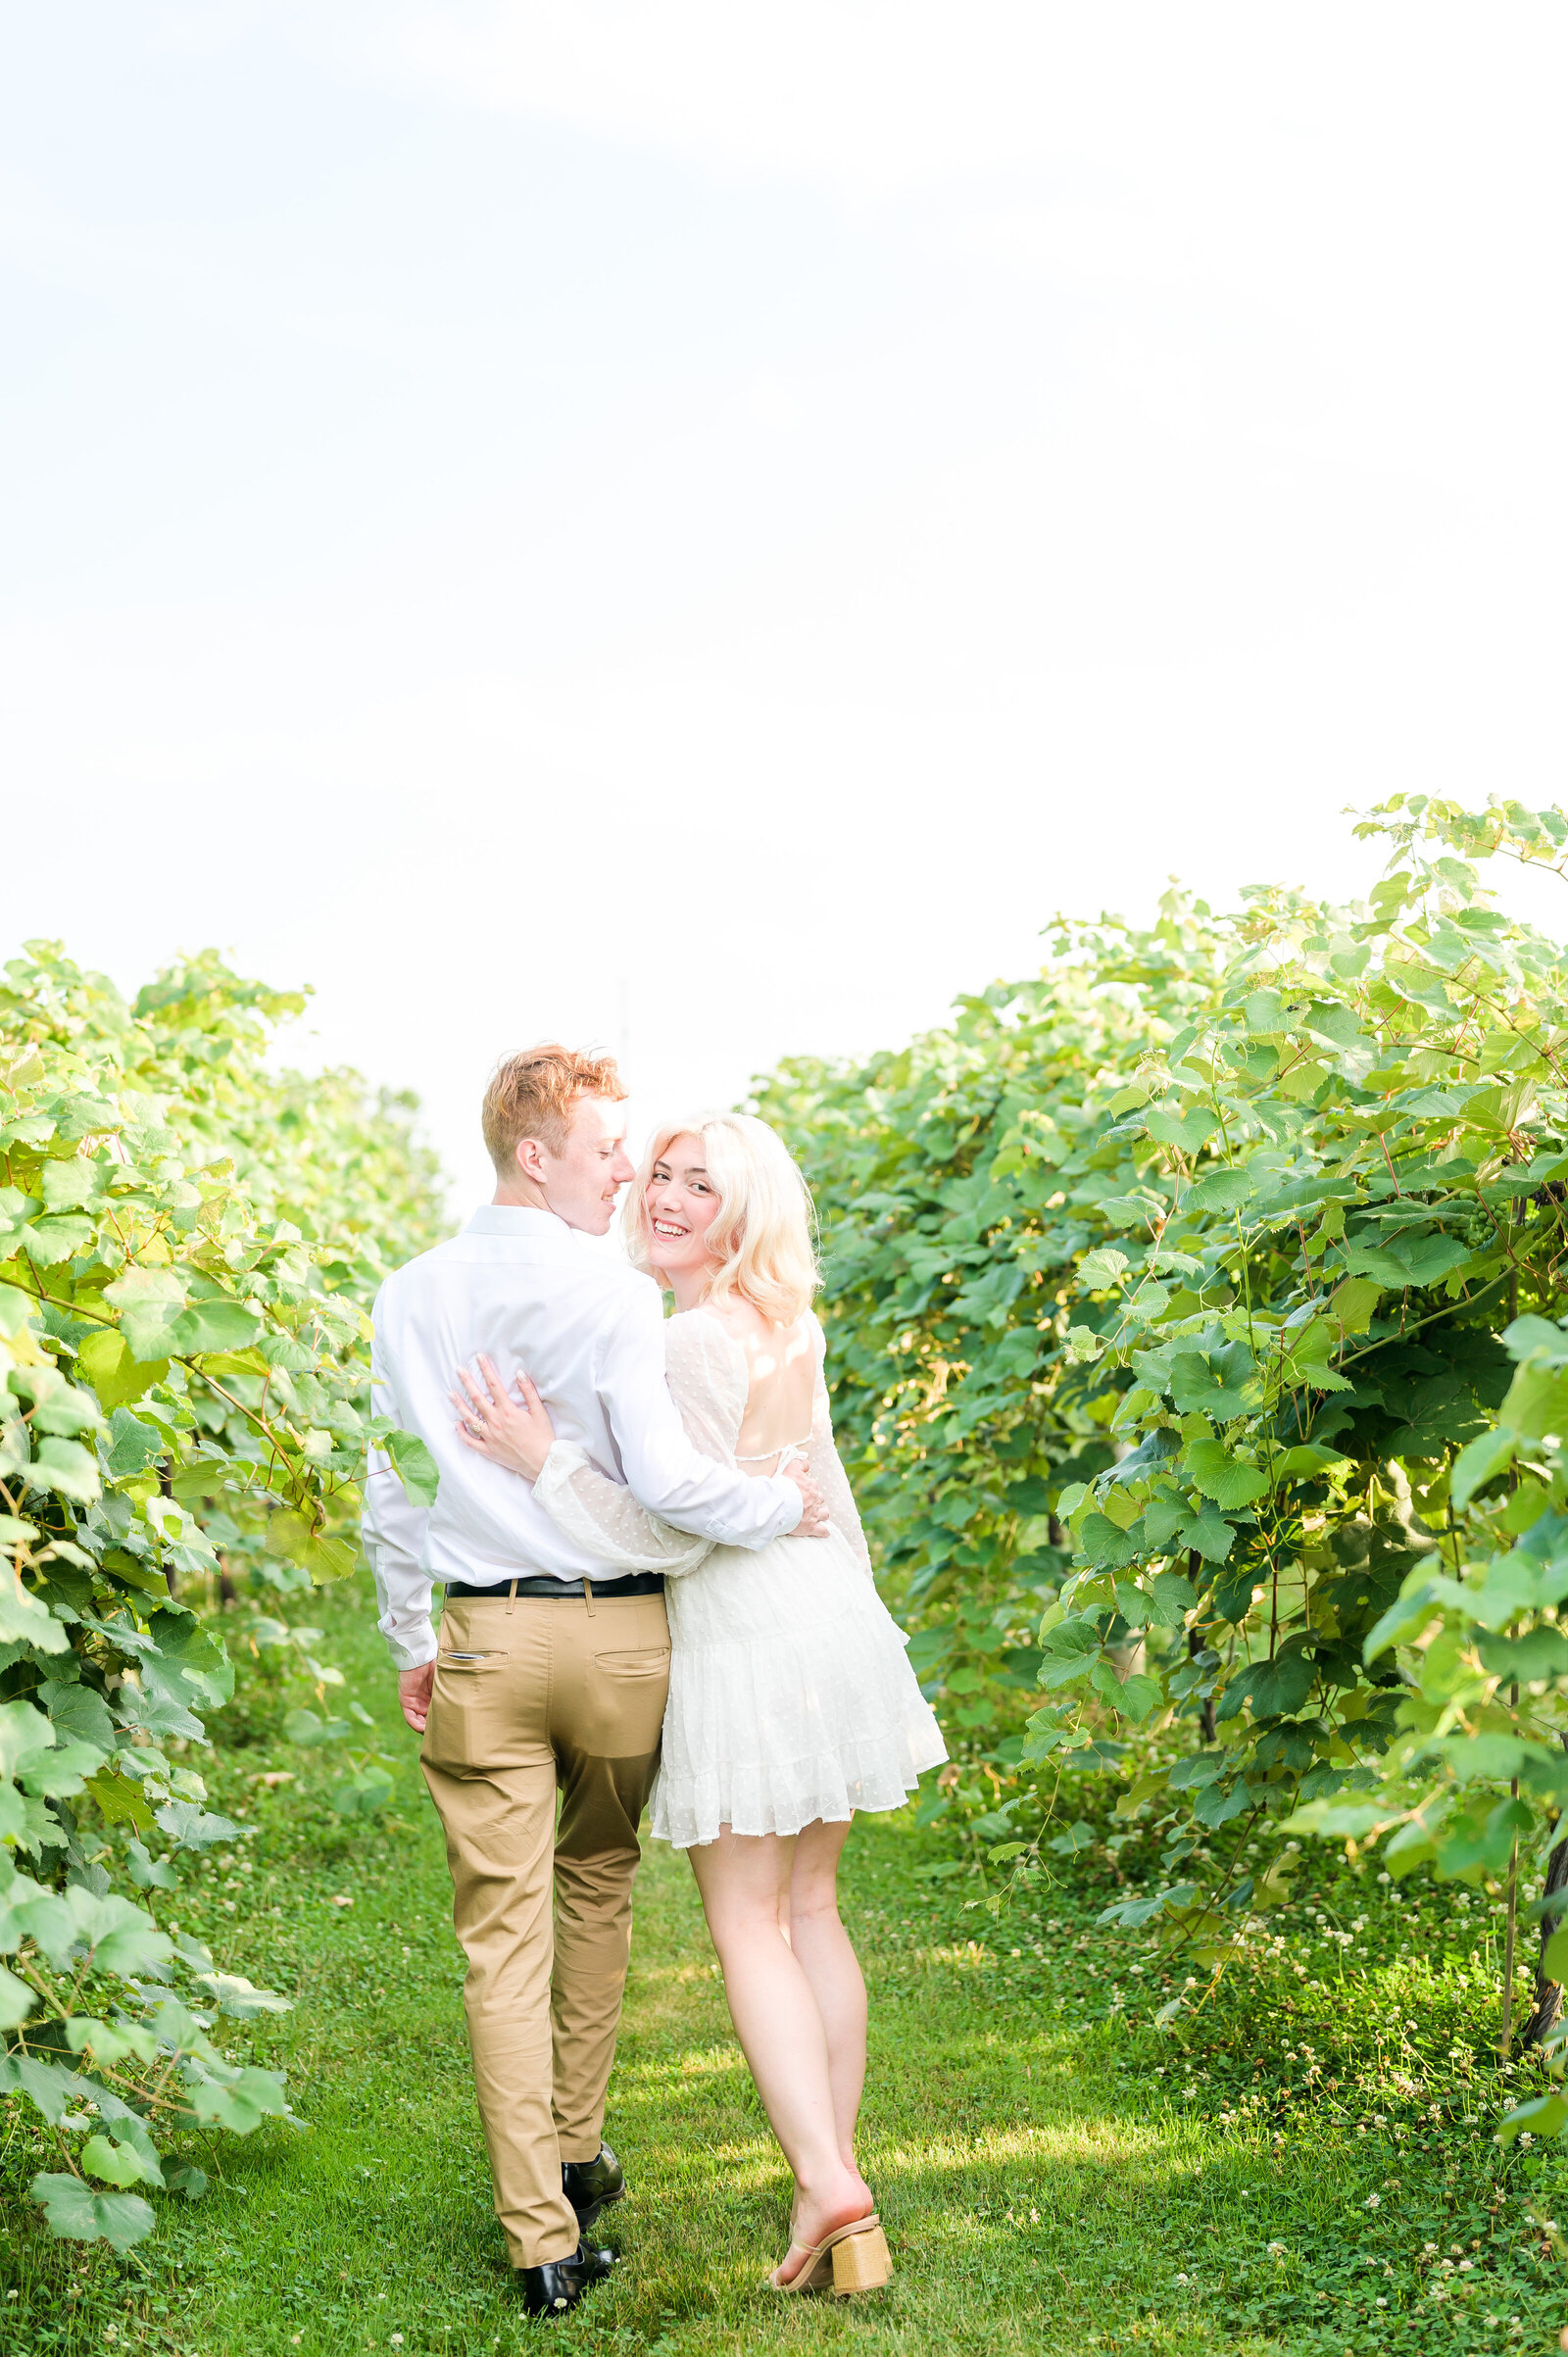 Oliver Winery Engagement Photos